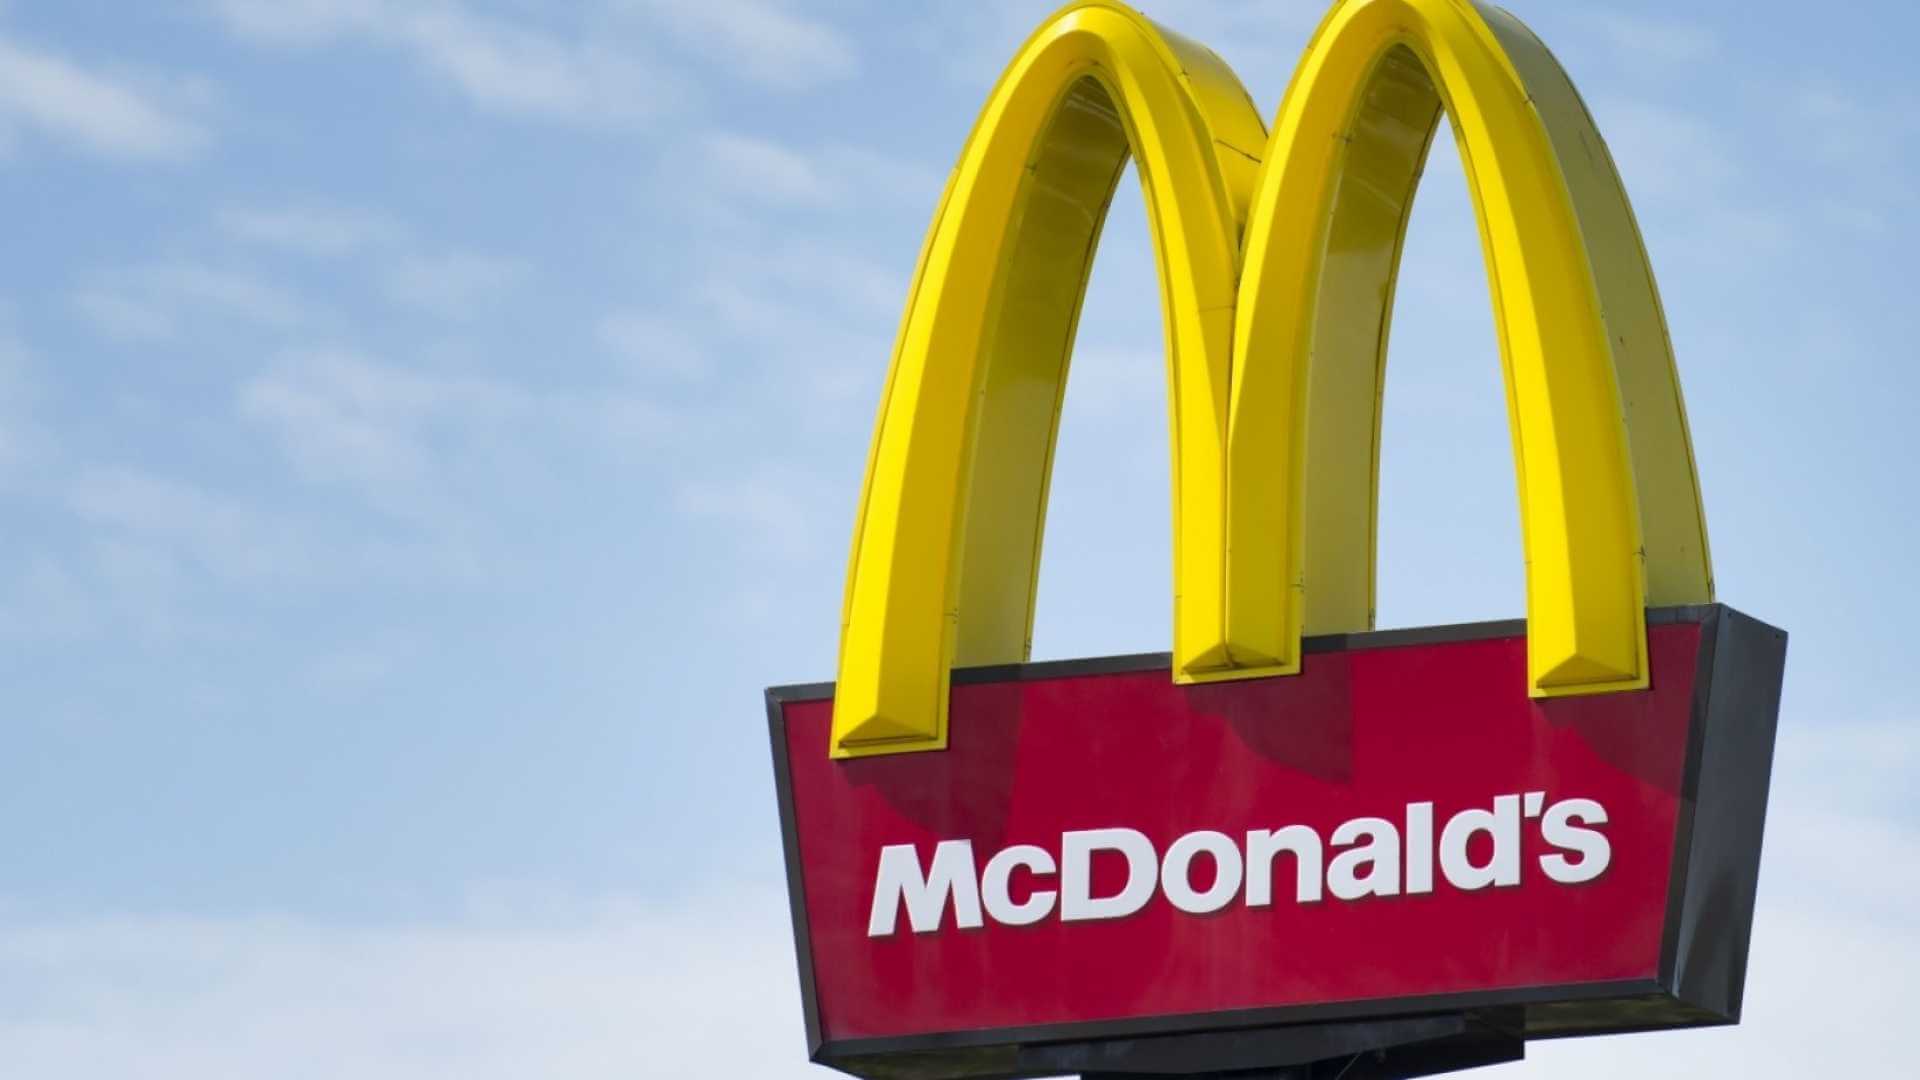 McDonald’s to Require Face Coverings Nationwide